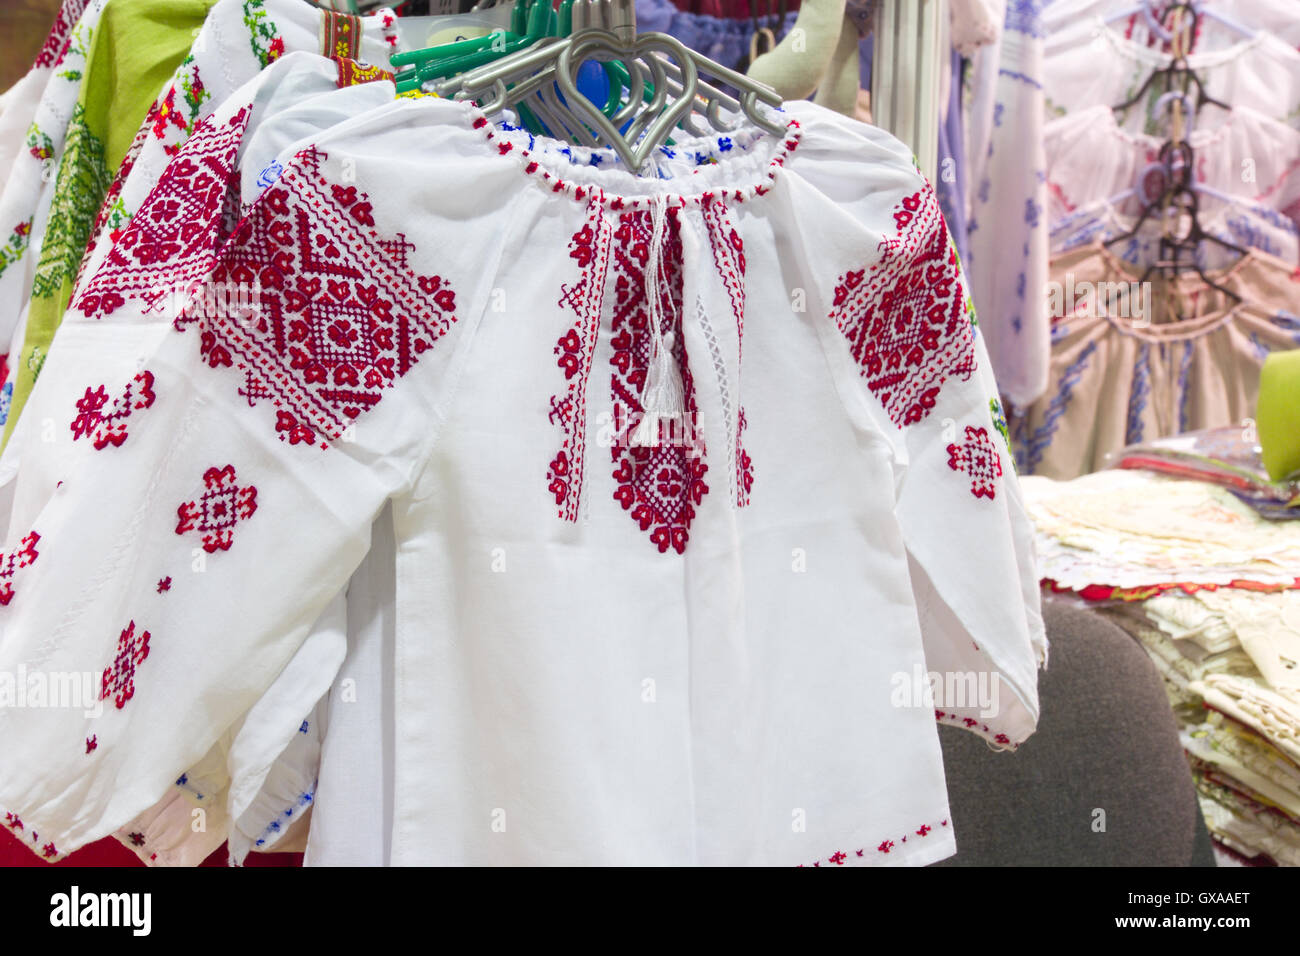 Handmade traditional national russian clothes with embroidery and ornaments. Shot was done at the flea market in Moscow (Russia) Stock Photo